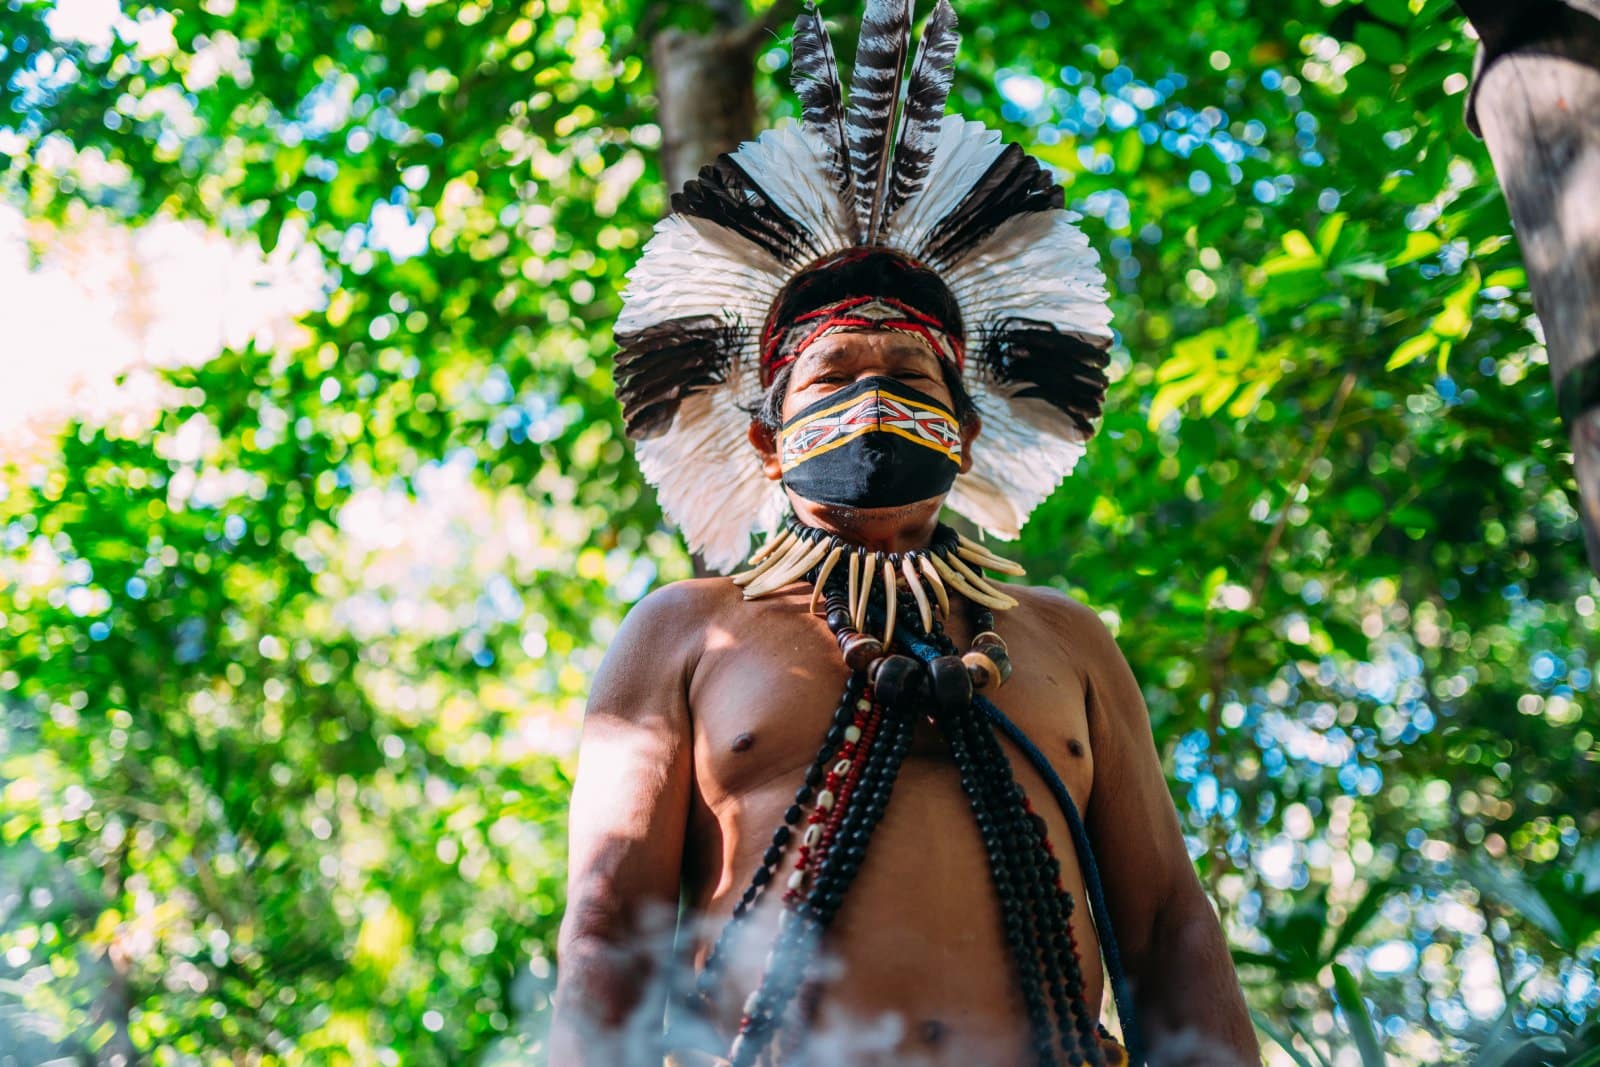 <p class="wp-caption-text">Image Credit: Shutterstock / Brastock</p>  <p><span>The Amazon Rainforest is under threat from deforestation, mining, and climate change, which in turn threatens the biodiversity that supports its spiritual and medicinal practices. Engaging in shamanic tours that are committed to conservation can help support the preservation of the Amazon and its cultures. Look for tours that actively contribute to reforestation, wildlife protection, and sustainable practices.</span></p>